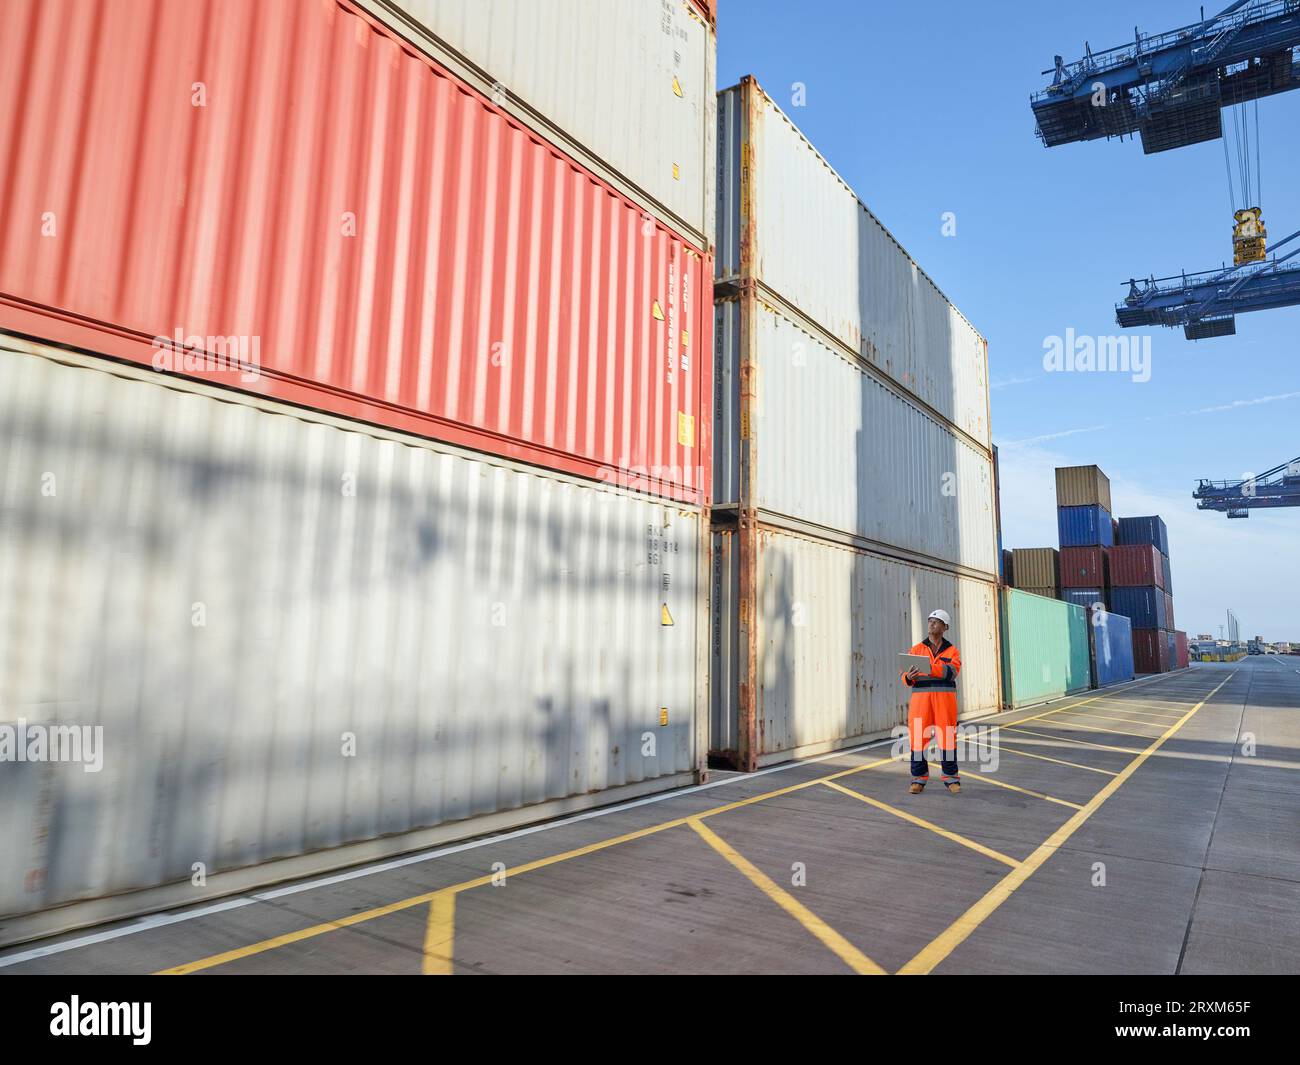 Dock worker with digital tablet Stock Photo